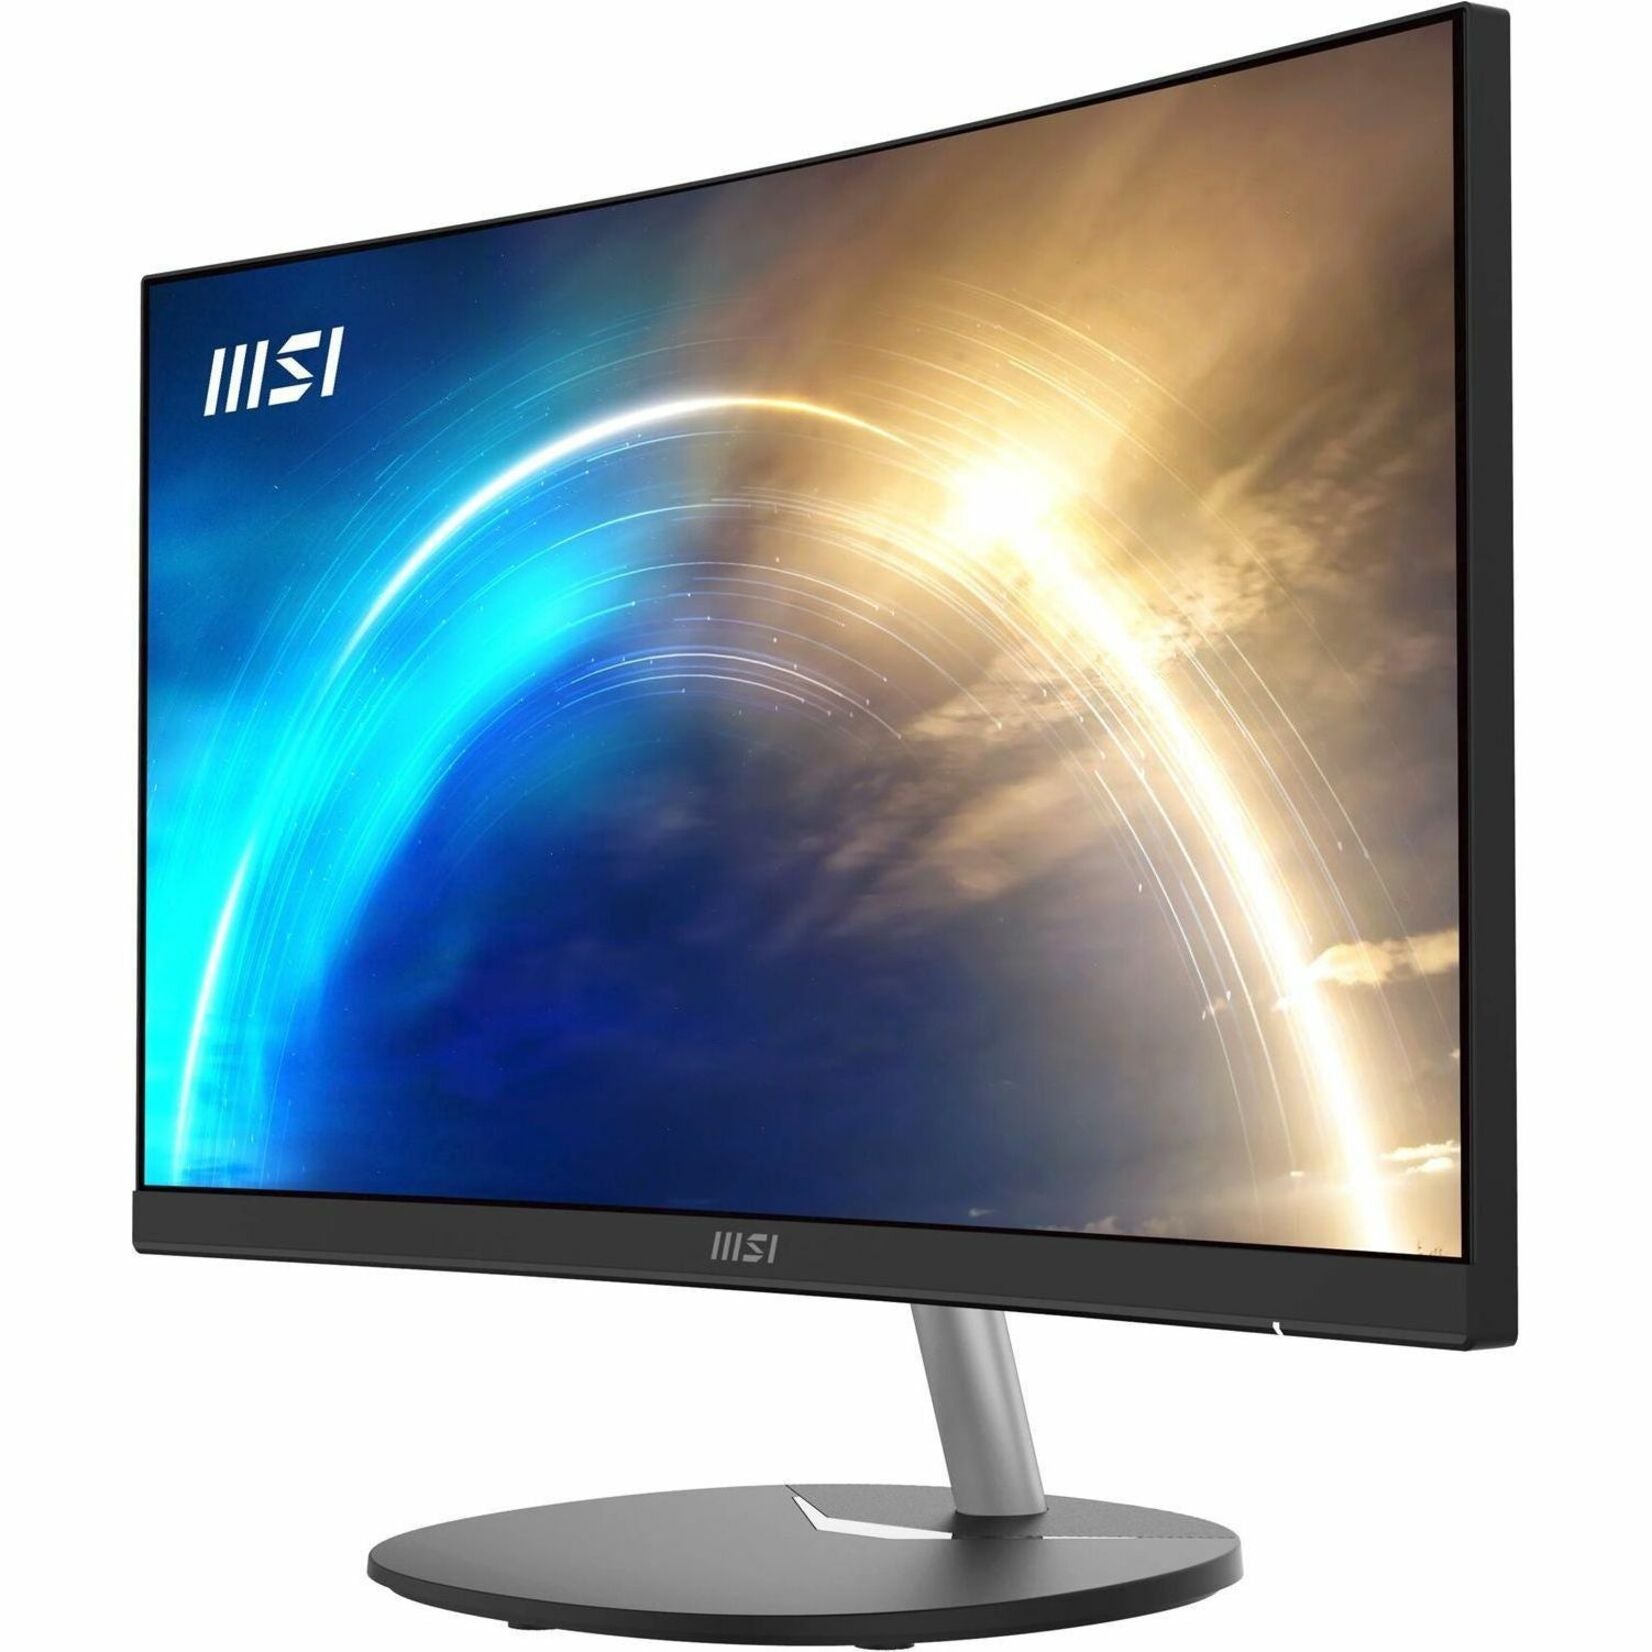 MSI Pro MP241CA Widescreen LCD Monitor - Full HD, 24, 1ms Response Time [Discontinued]